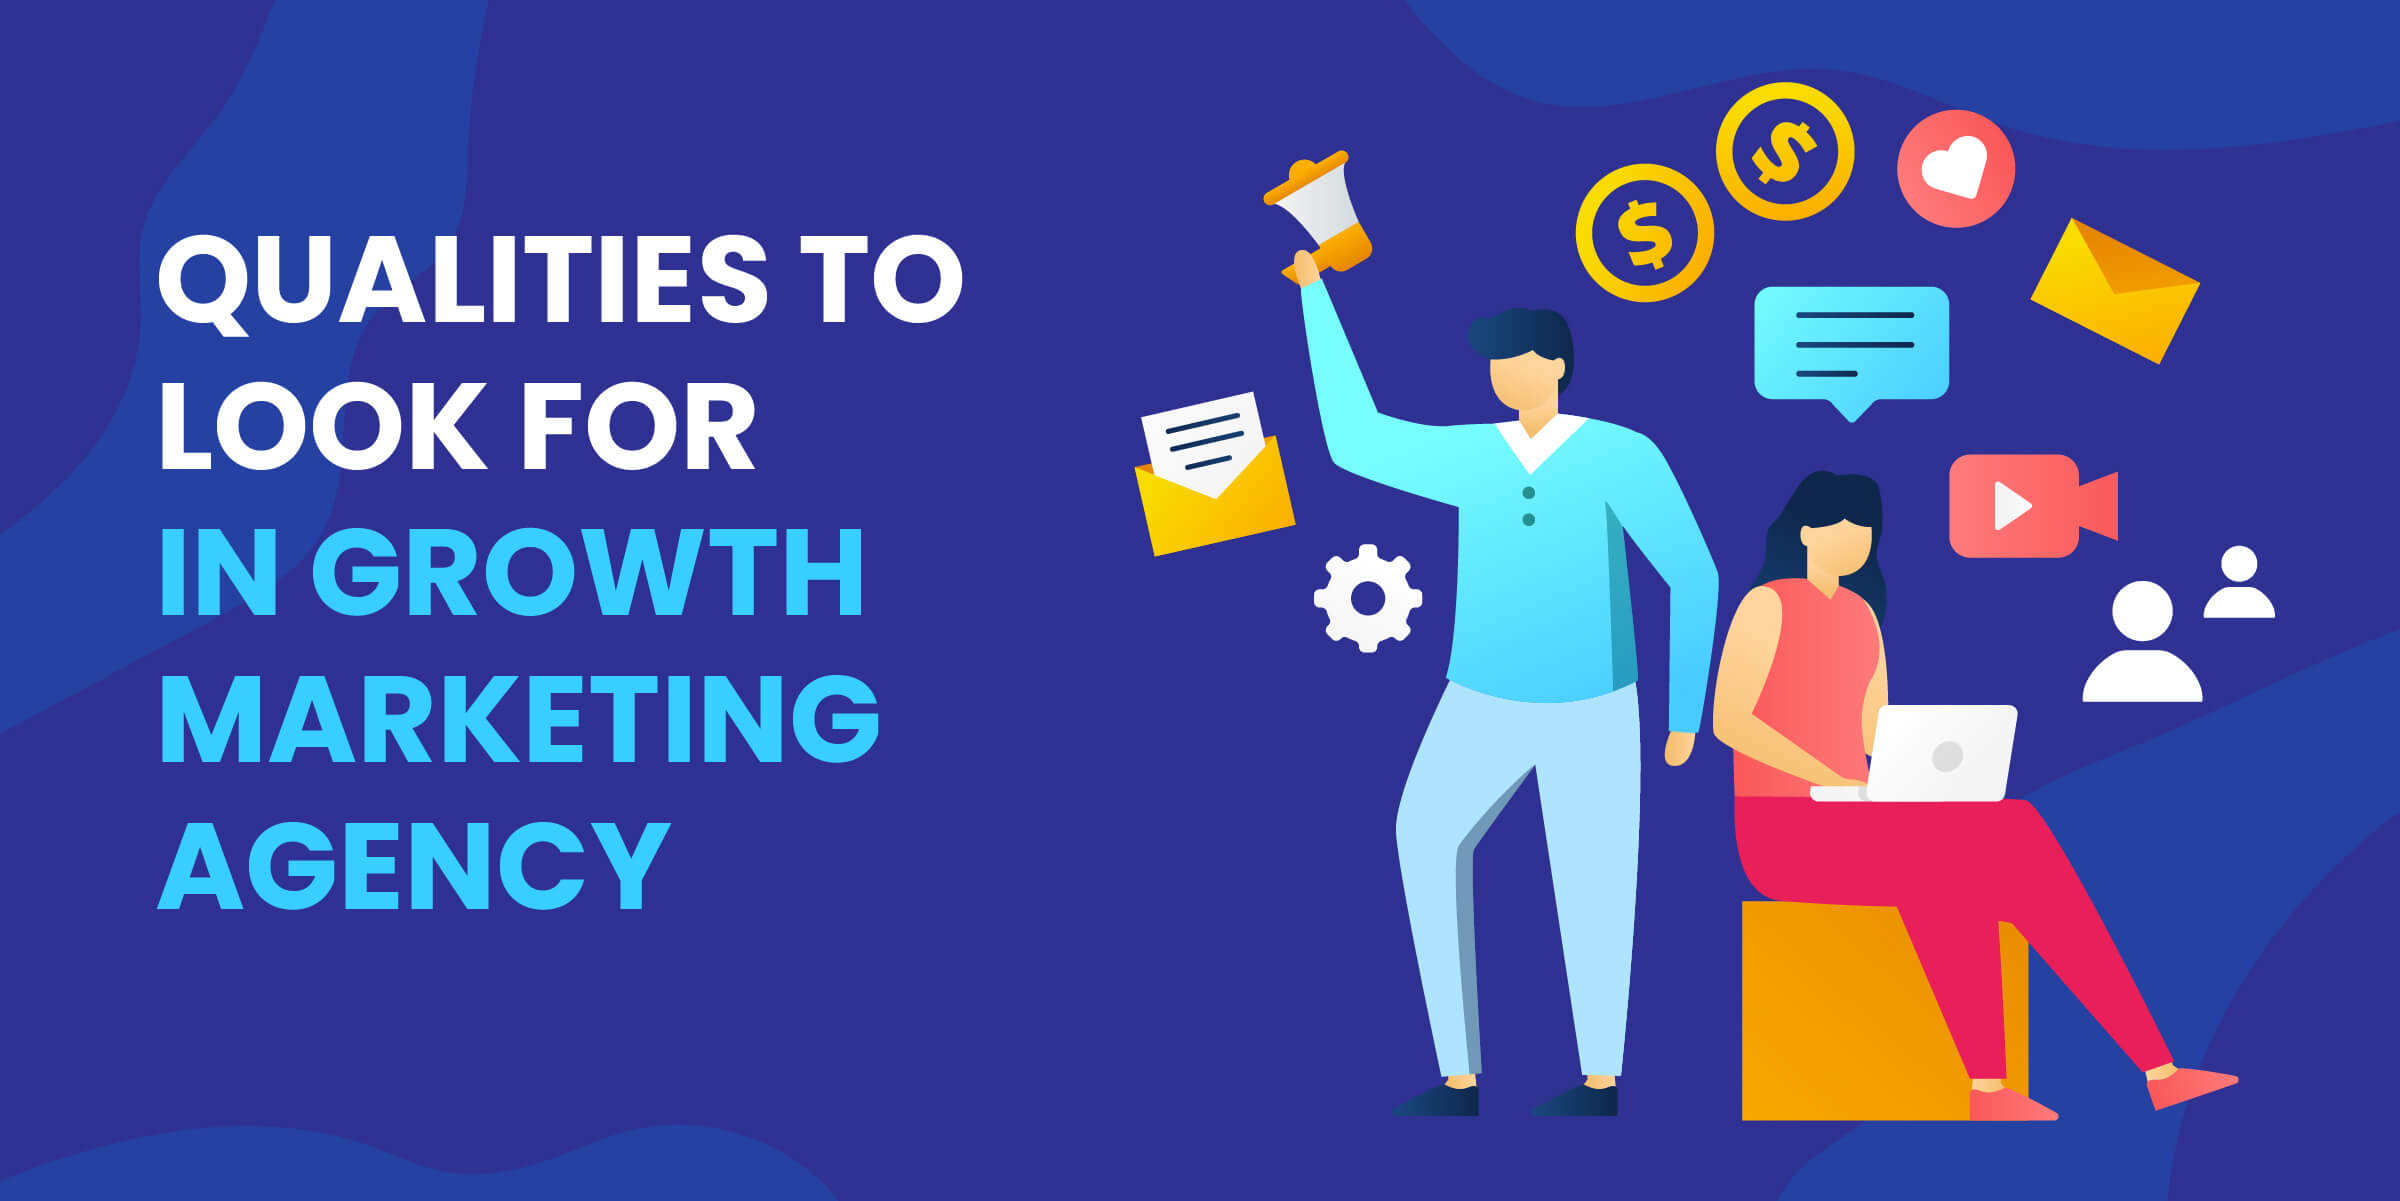 Qualities to Look for in Growth Marketing Agency